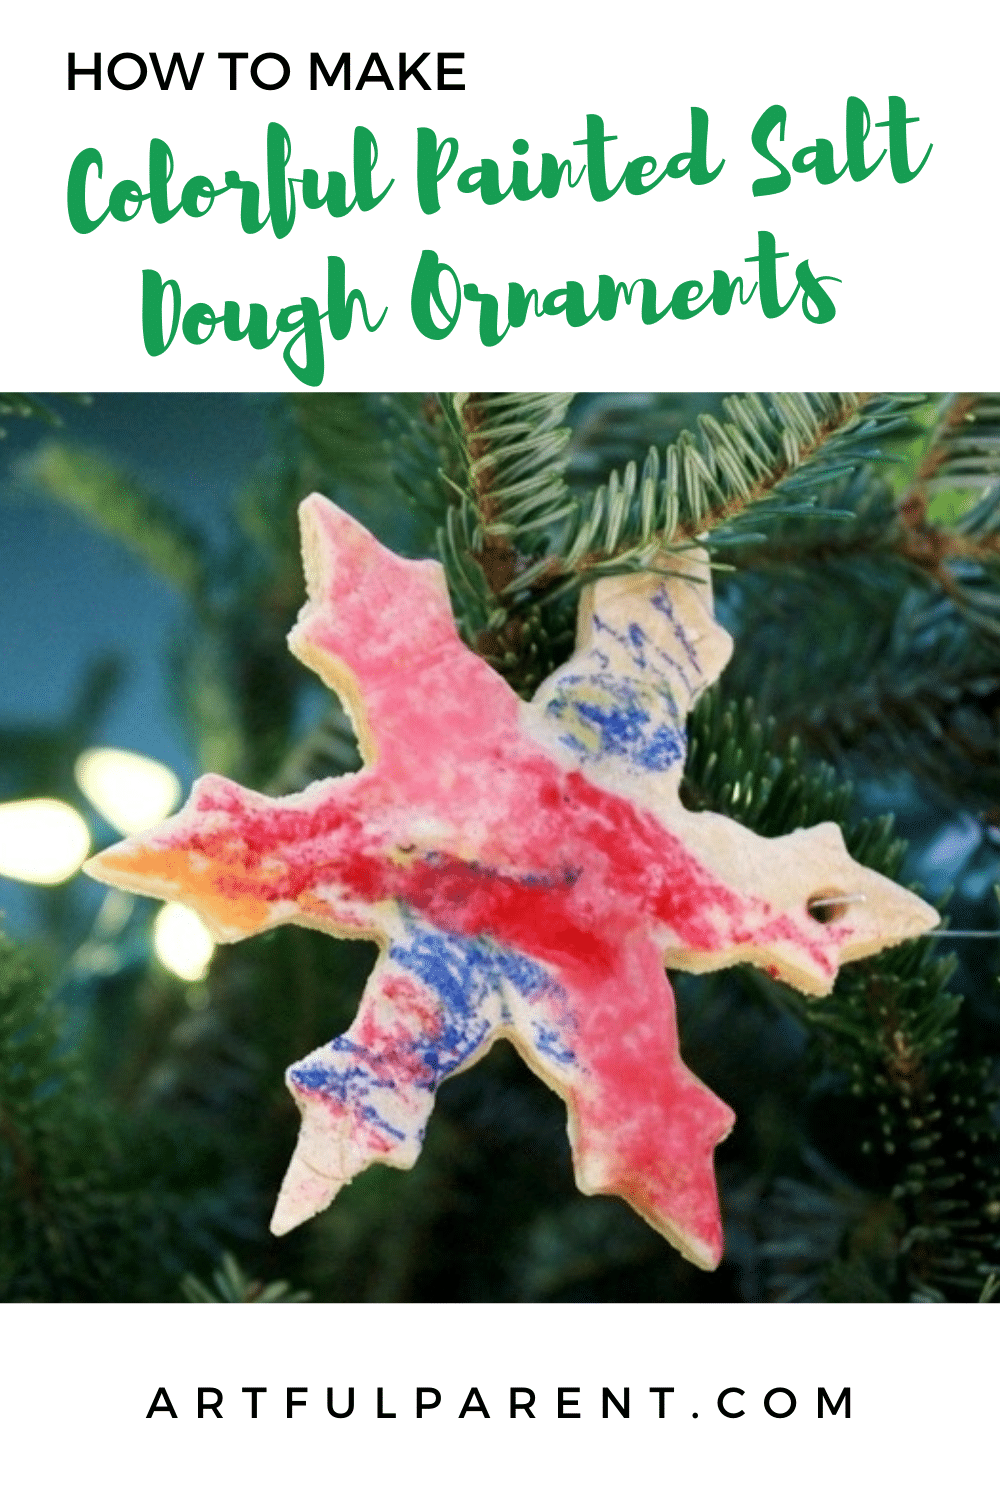 How to Make Painted Salt Dough Ornaments